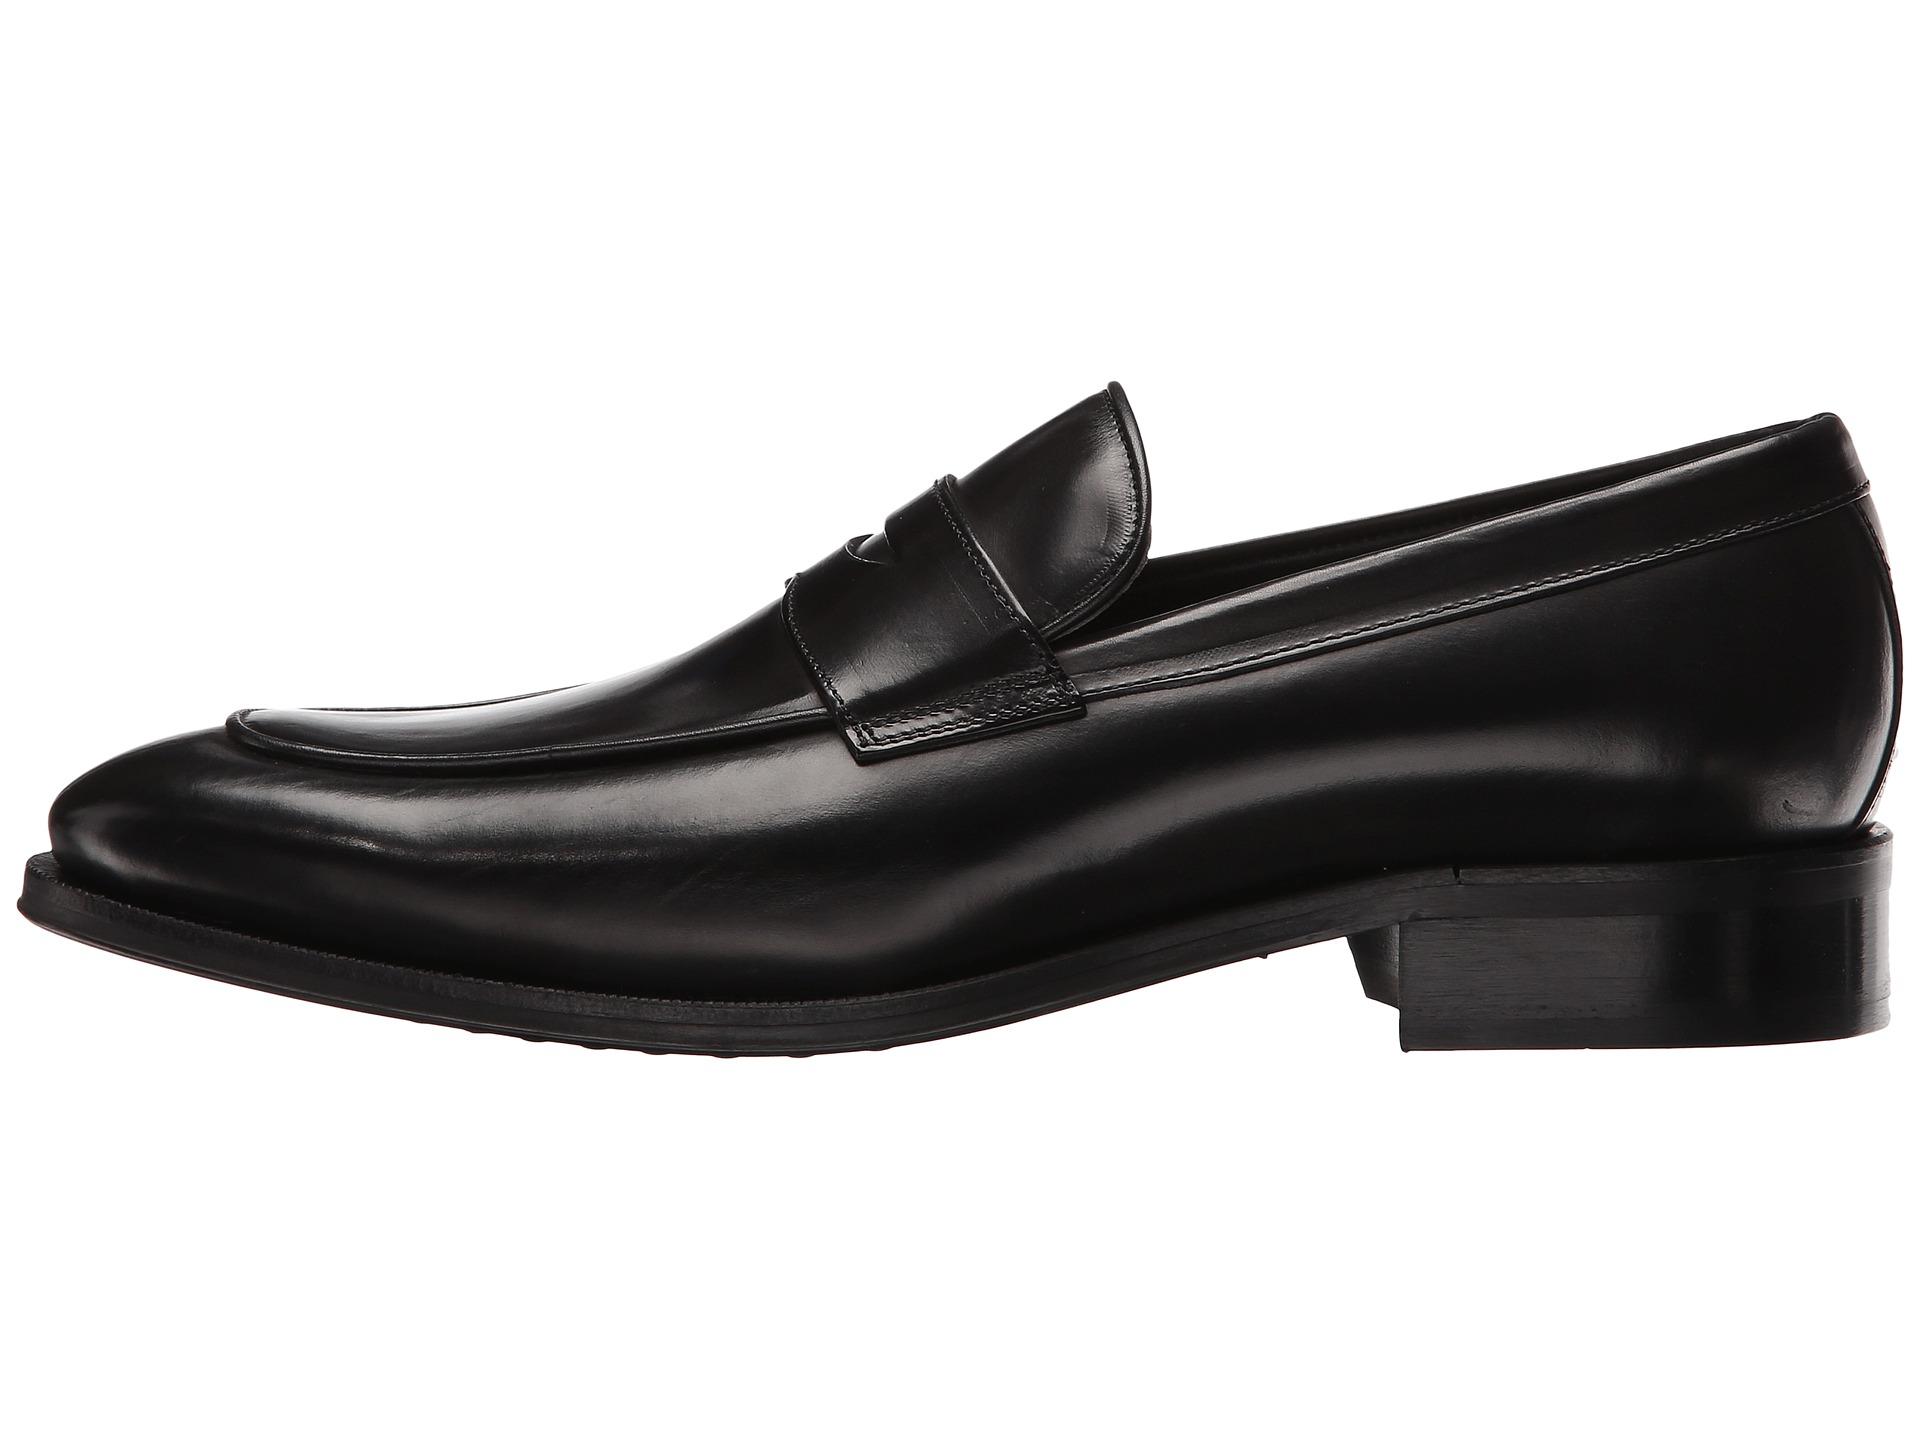 Lyst - To Boot Dupont in Black for Men